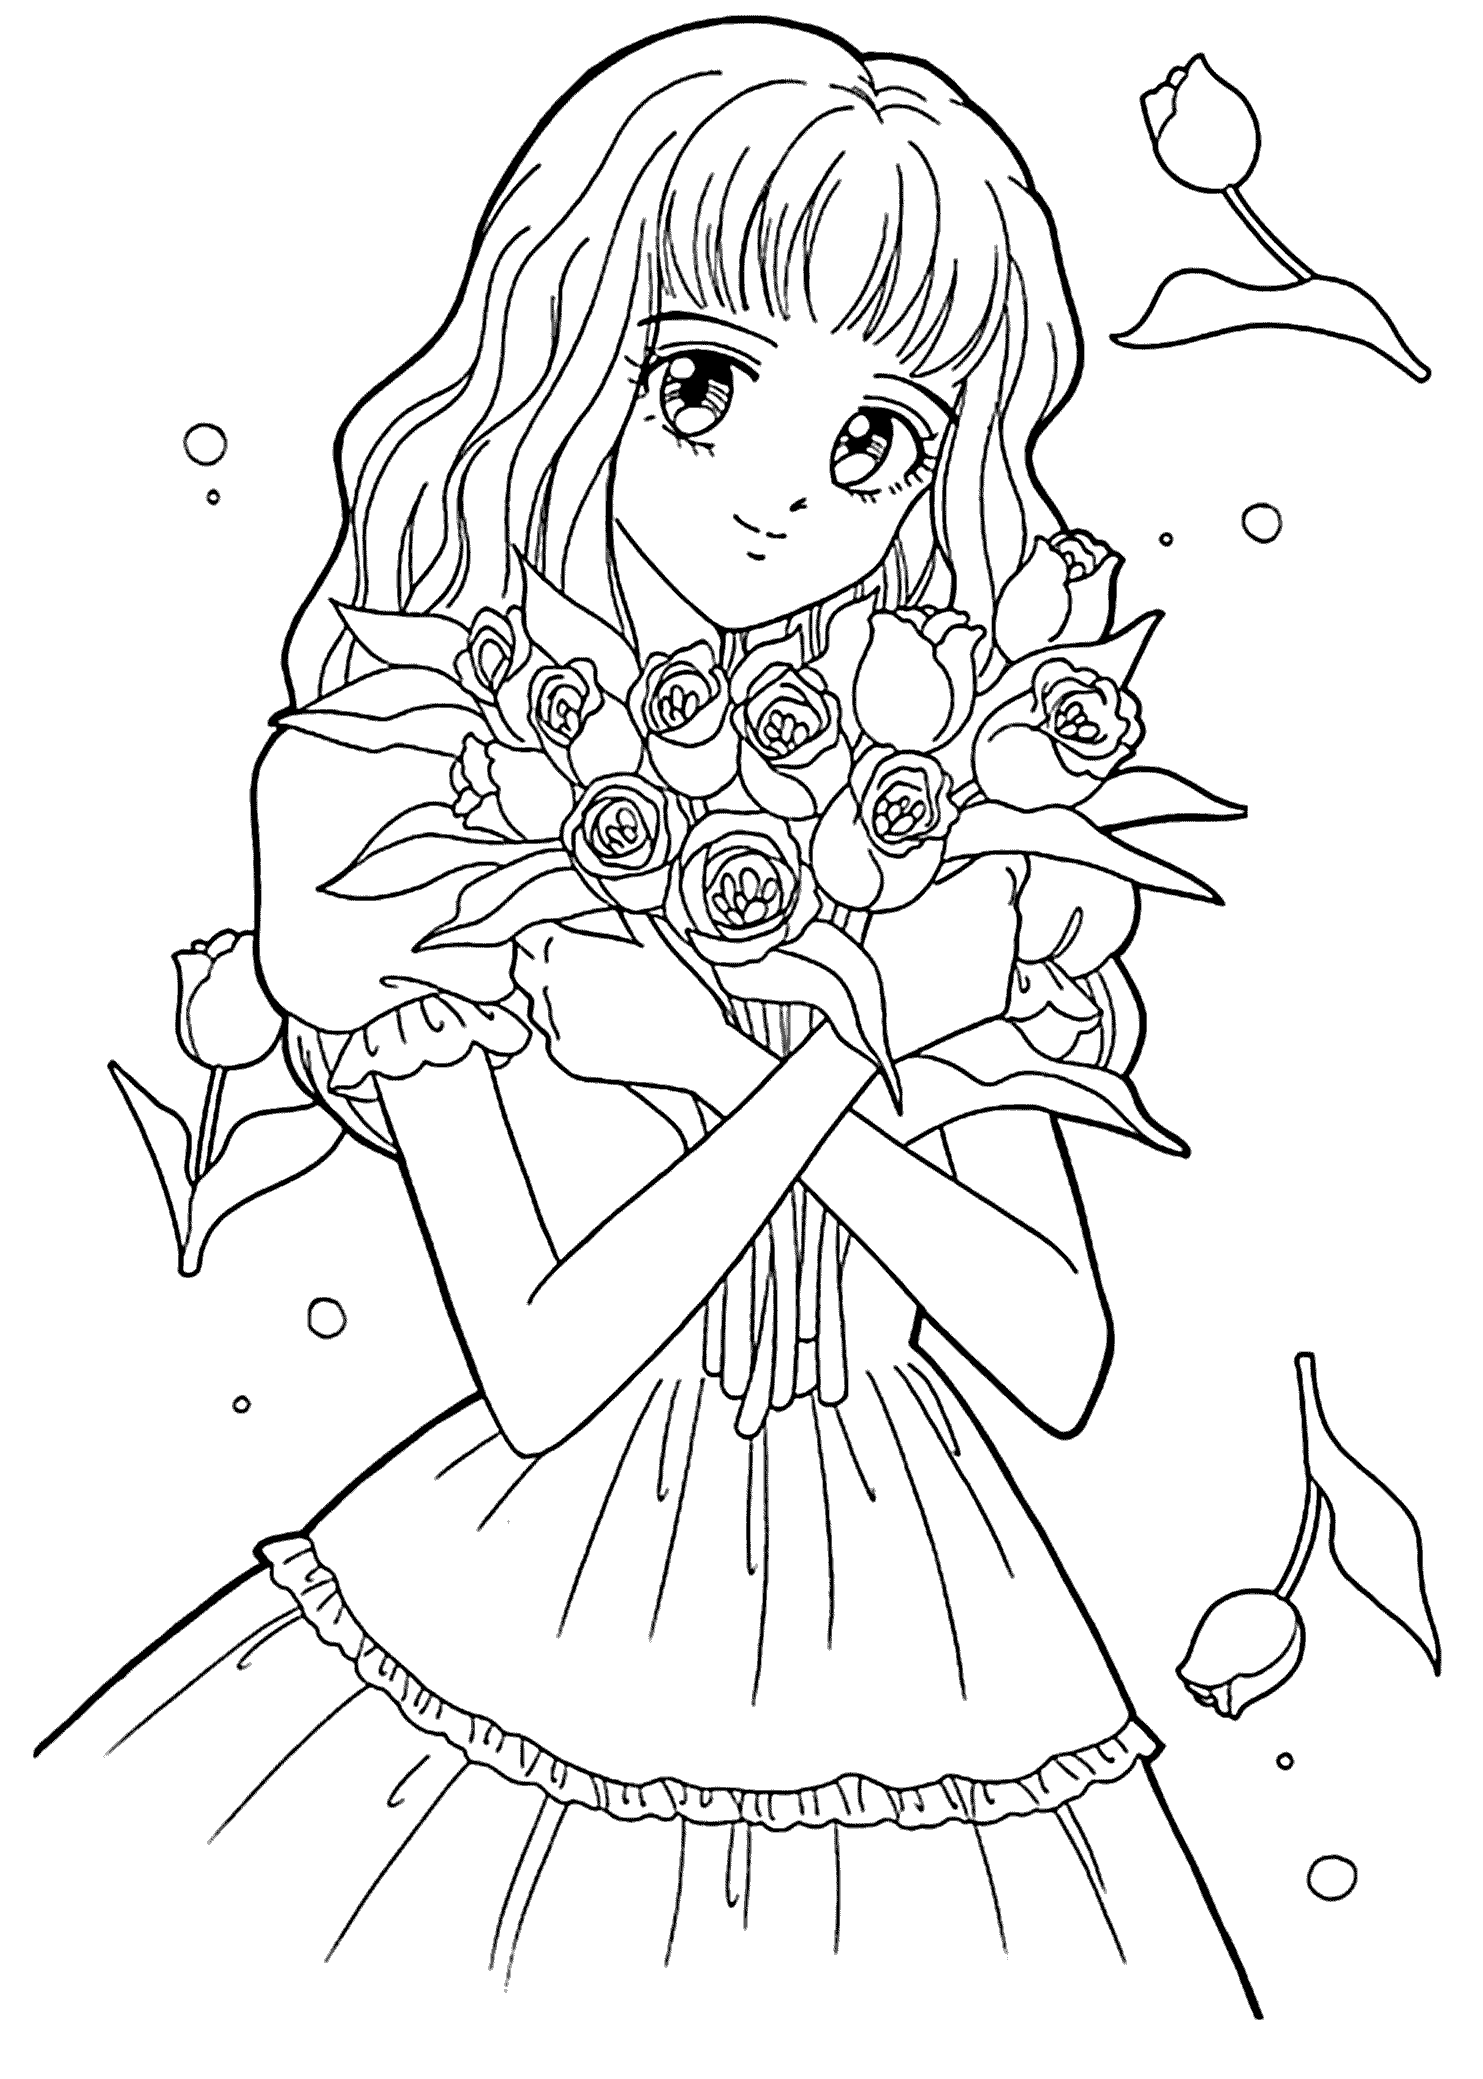 manga girl coloring pages manga coloring pages to download and print for free manga coloring girl pages 